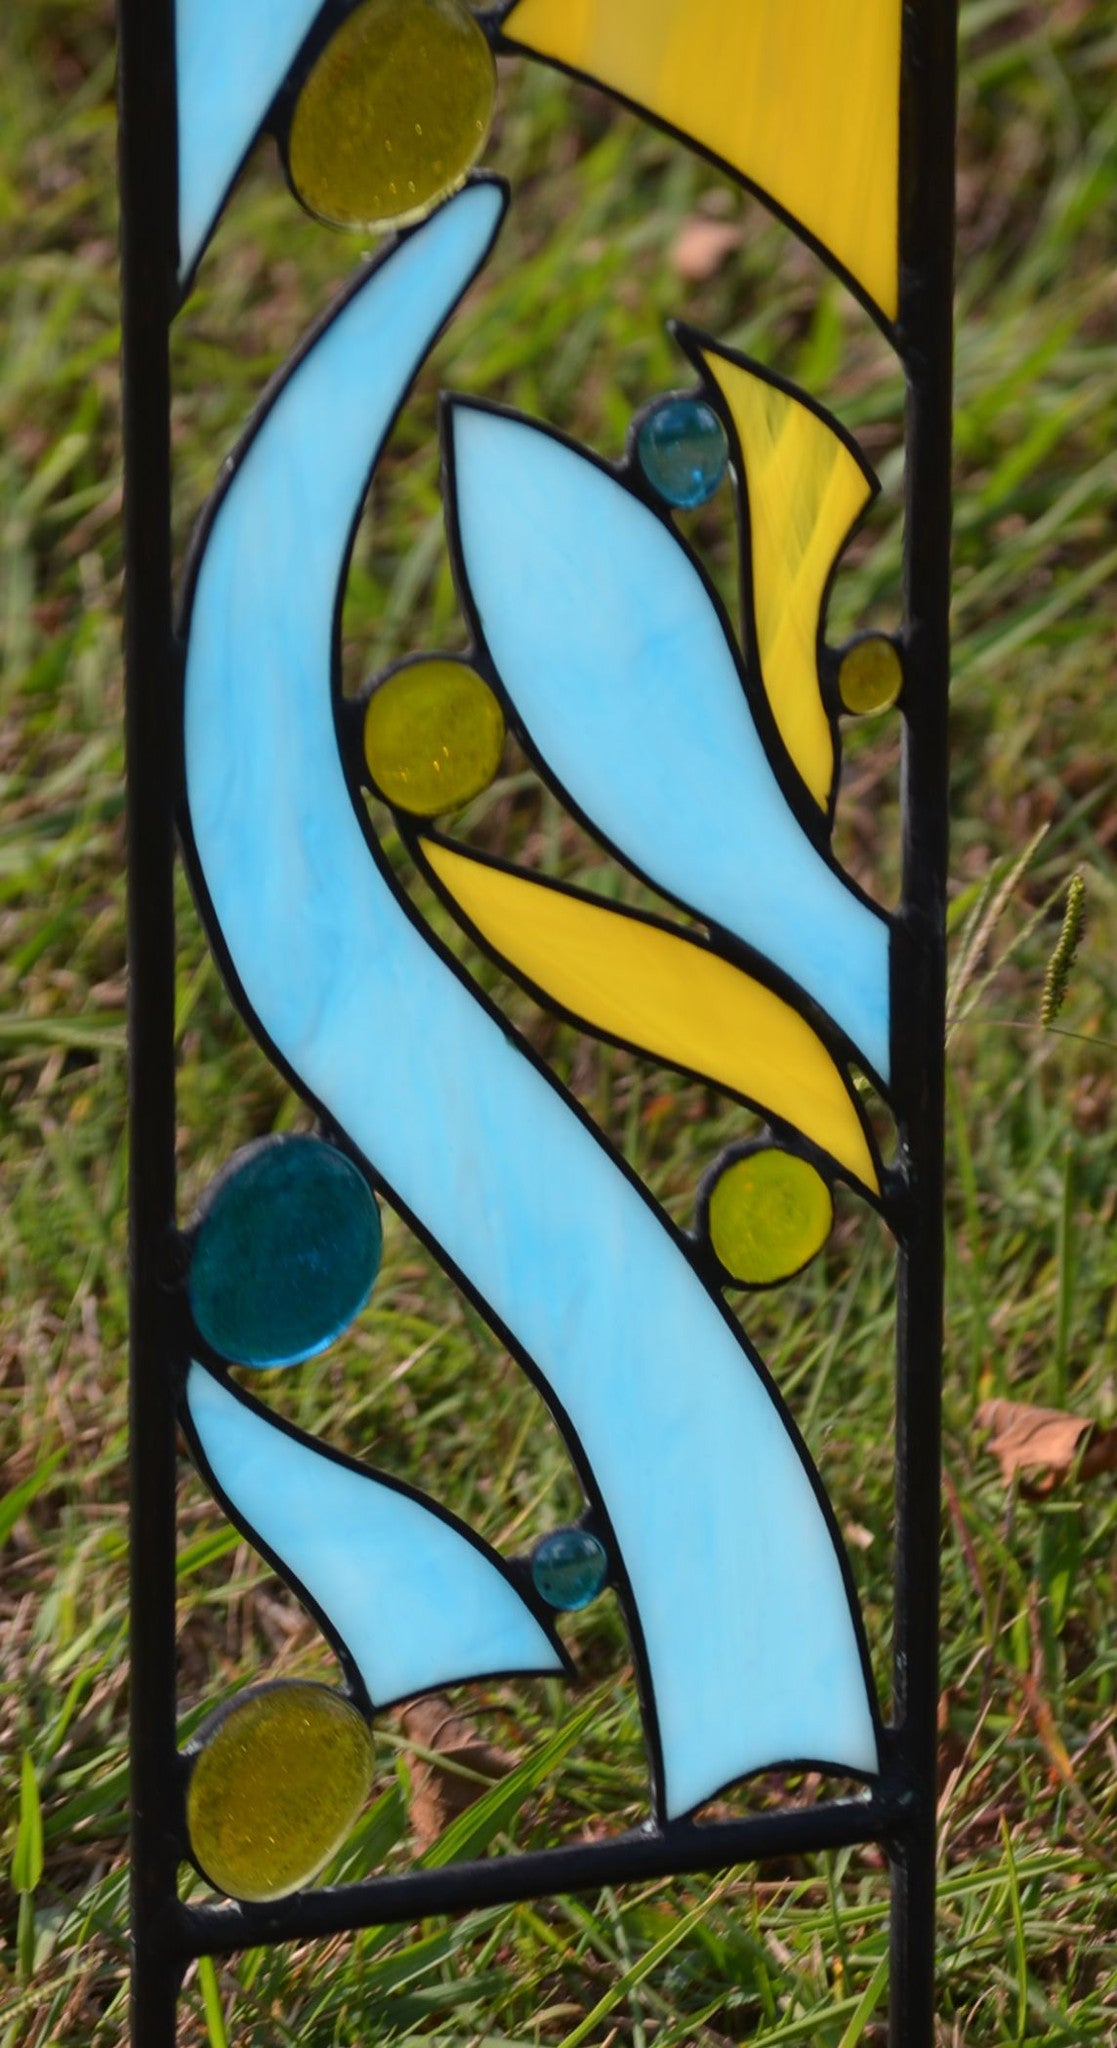 Custom Stained Glass Garden Decoration with Optional Religious Verse